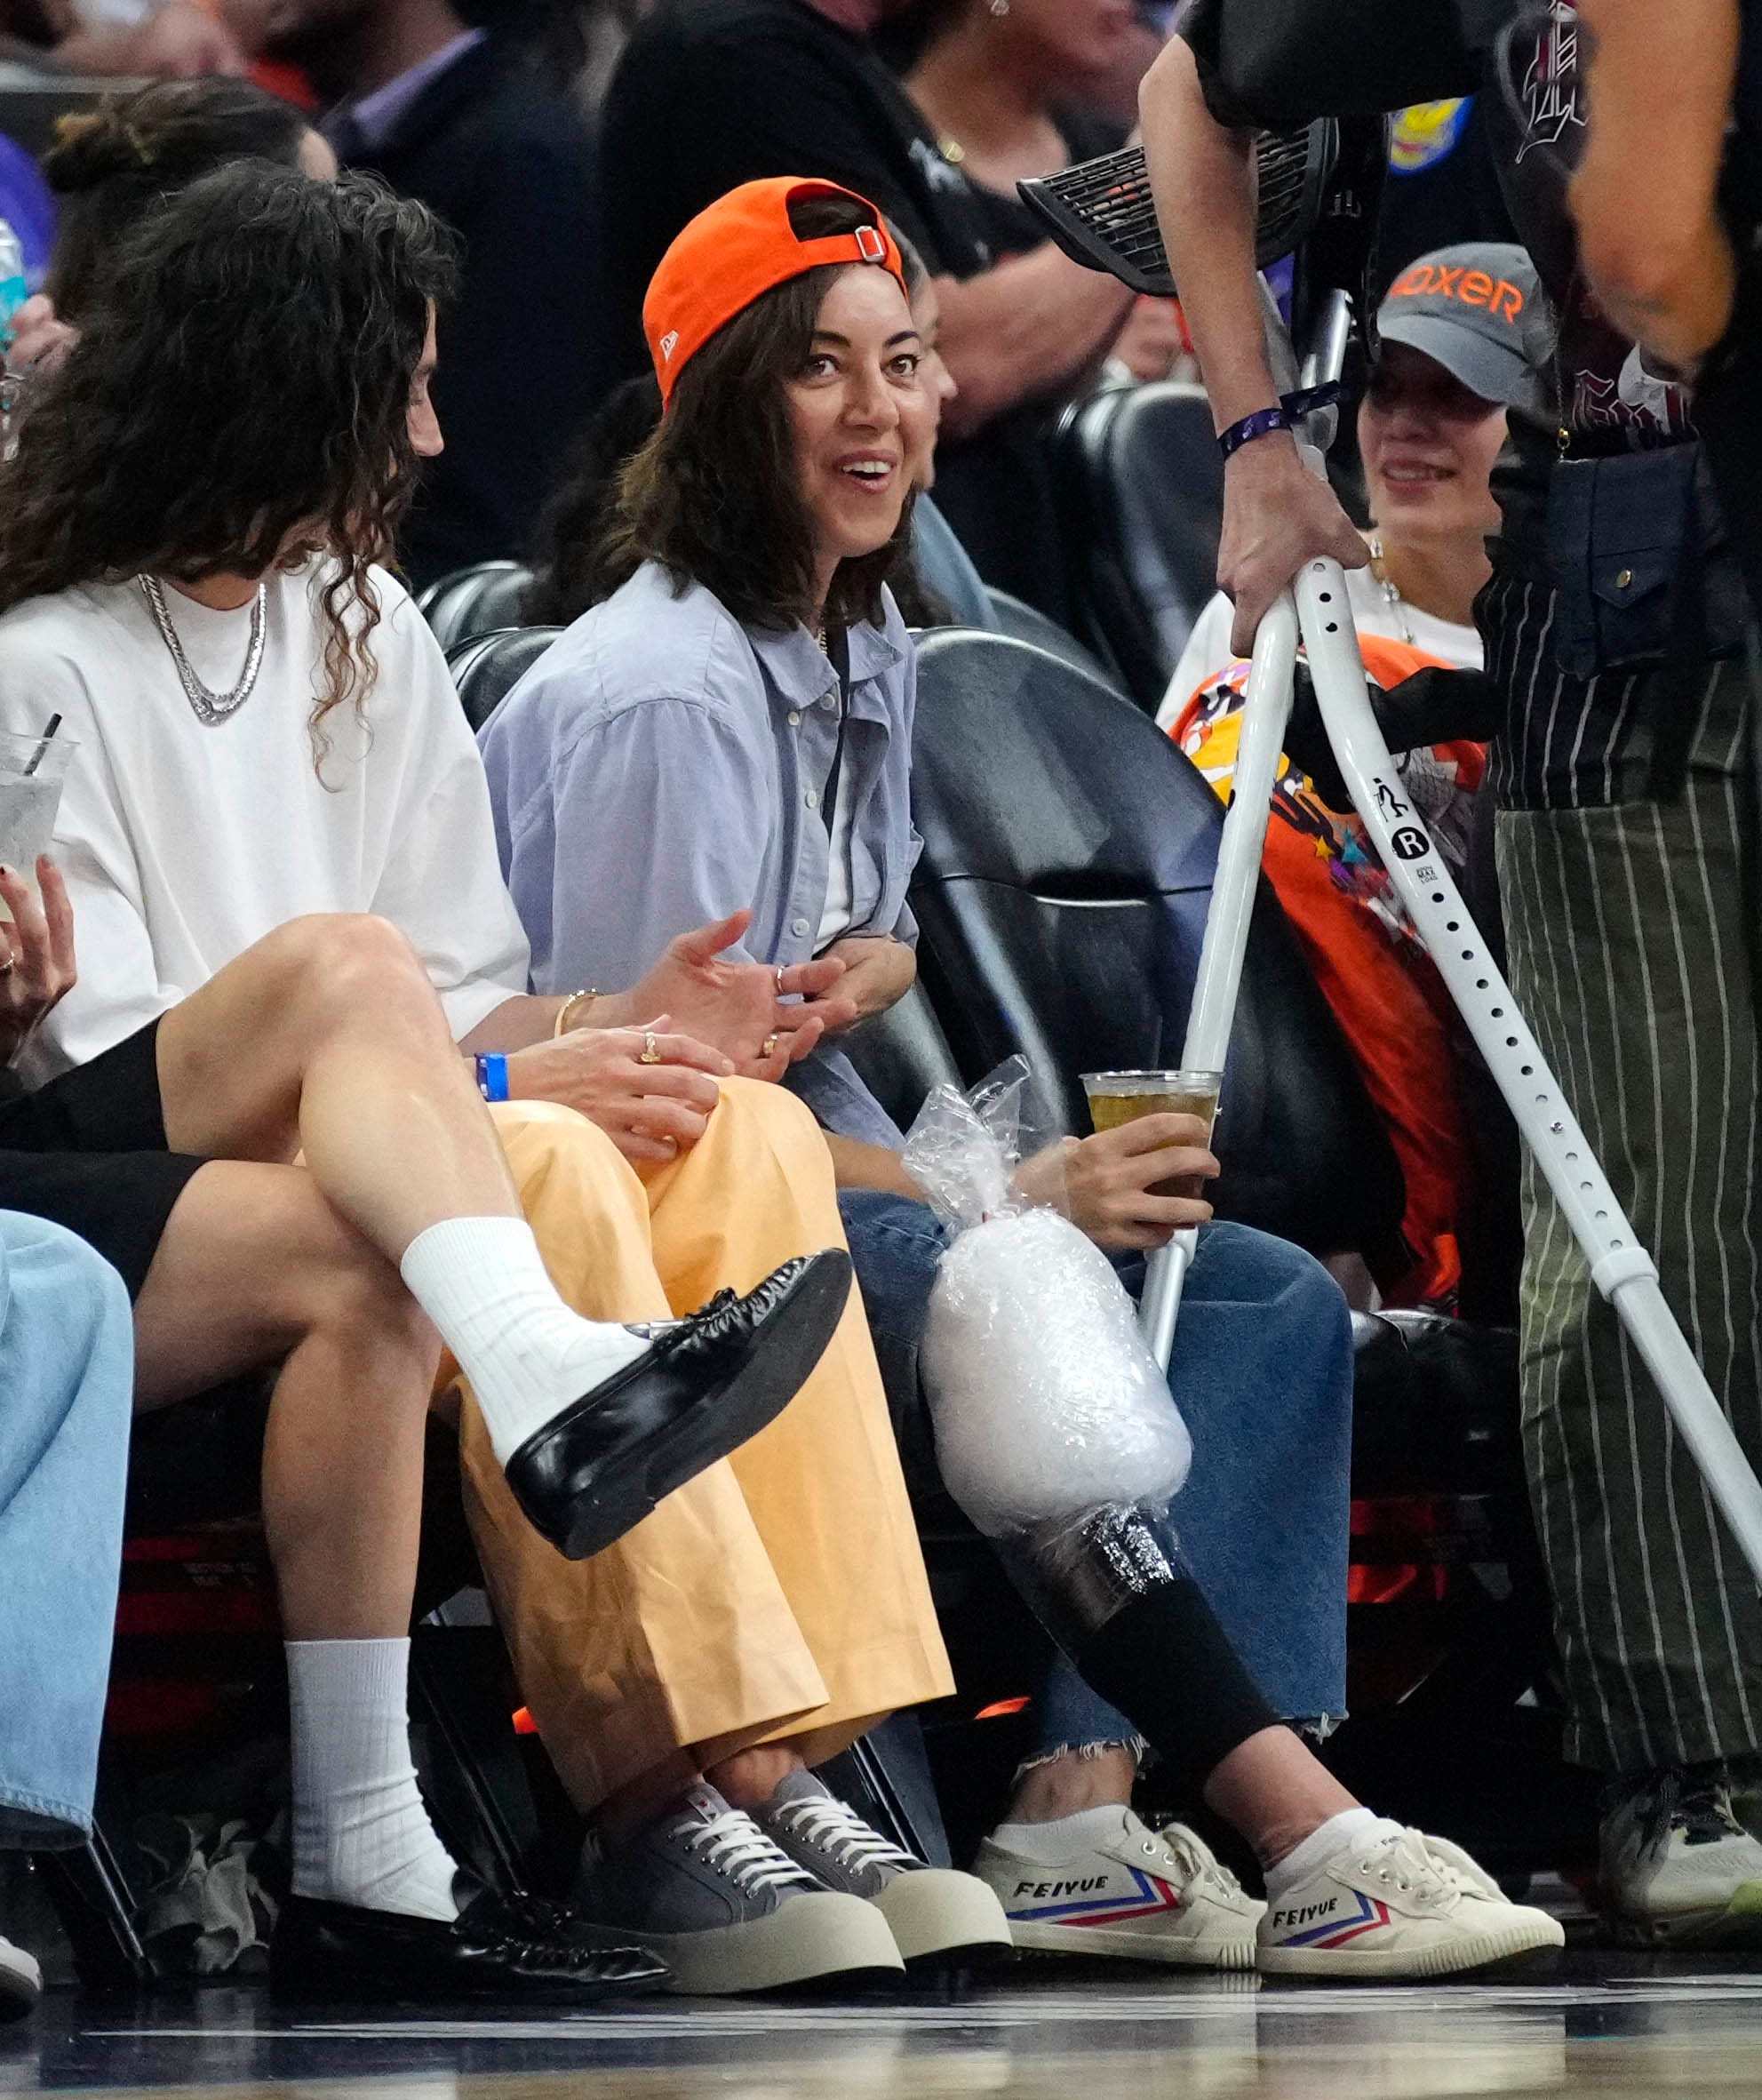 Aubrey Plaza on crutches at WNBA All-Star game. What happened?